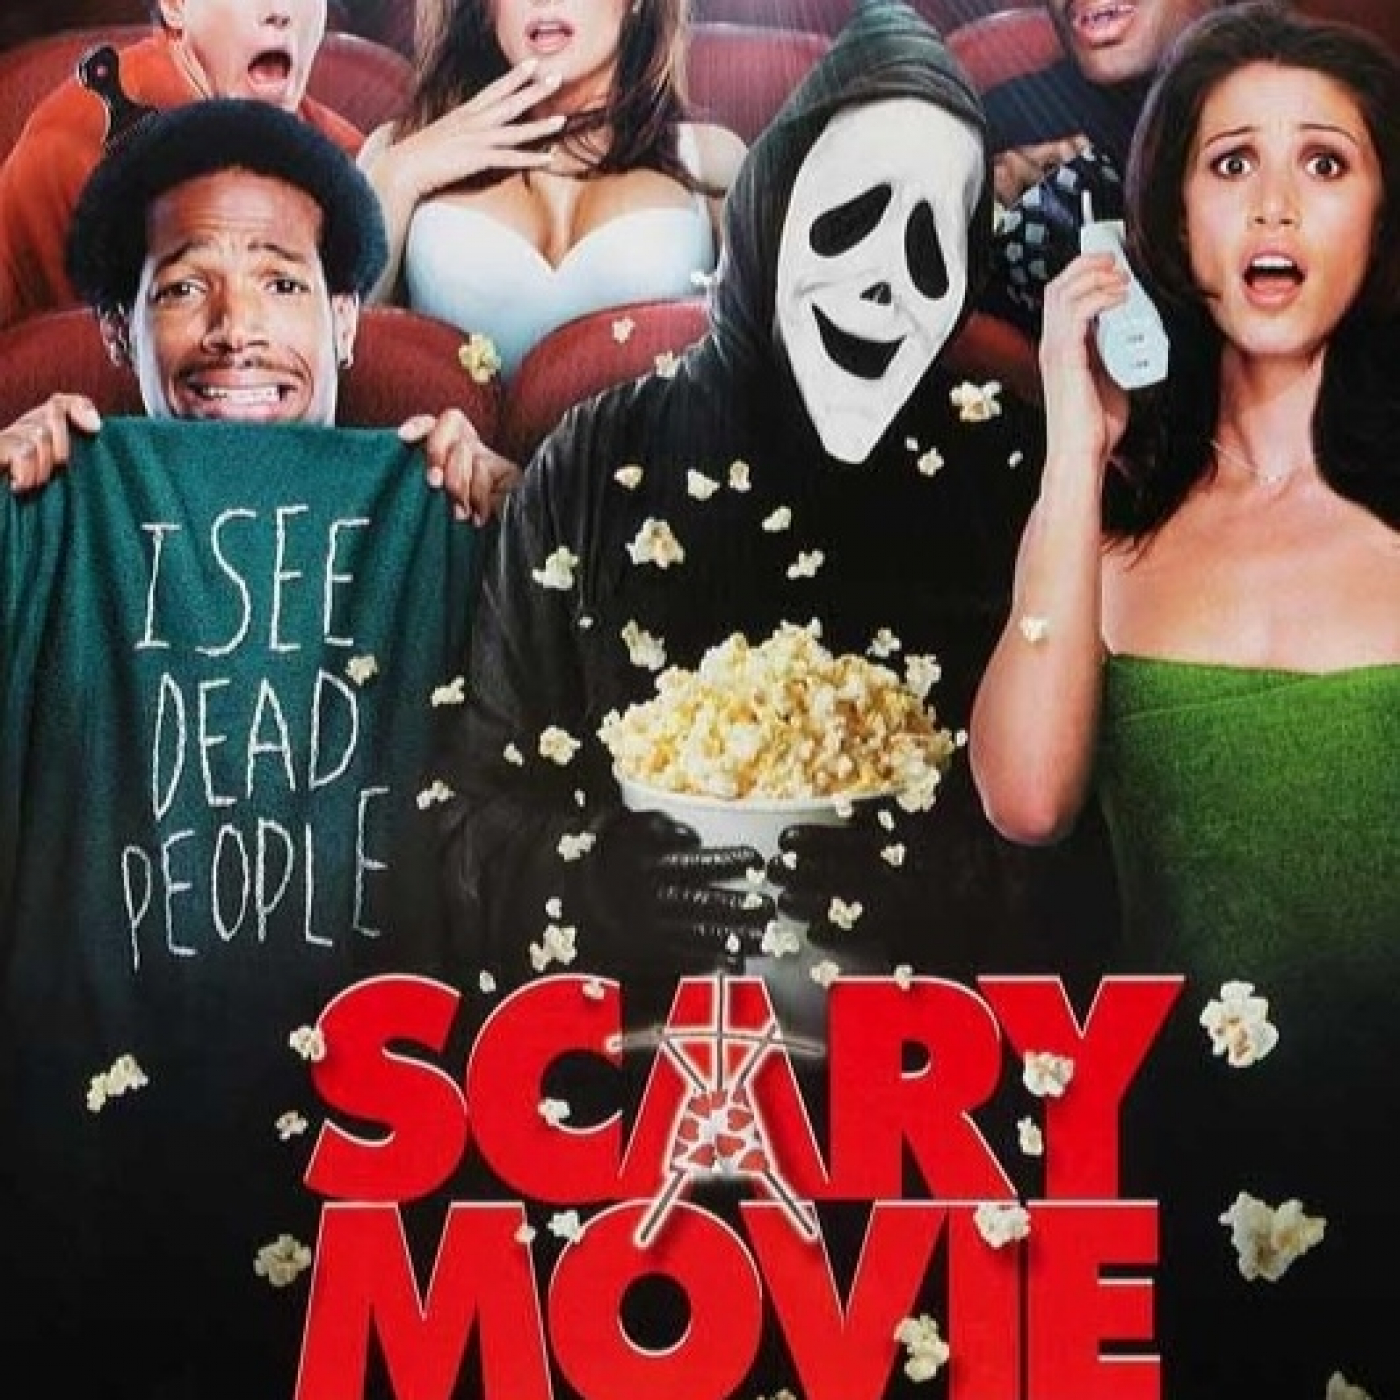 Movies requests - Scary Movie -vo- 2000